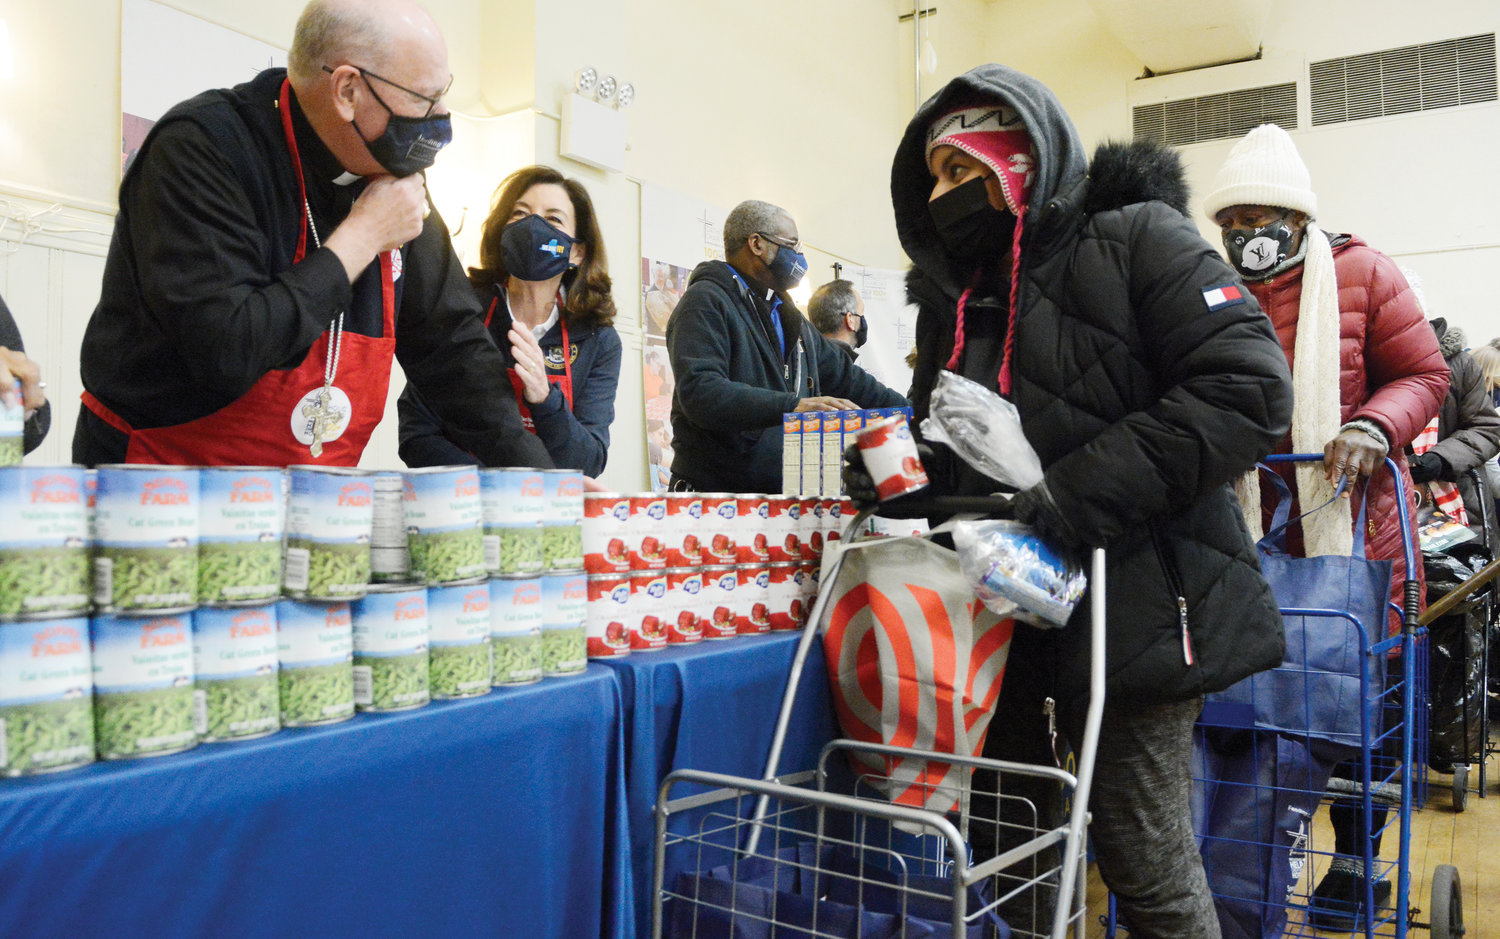 Cardinal Dolan and New York state Gov. Kathy Hochul distribute food to go along with the 1,000 turkeys given to families at Catholic Charities of New York’s annual Thanksgiving turkey distribution at Lt. Joseph P. Kennedy Community Center in Harlem Nov. 23.